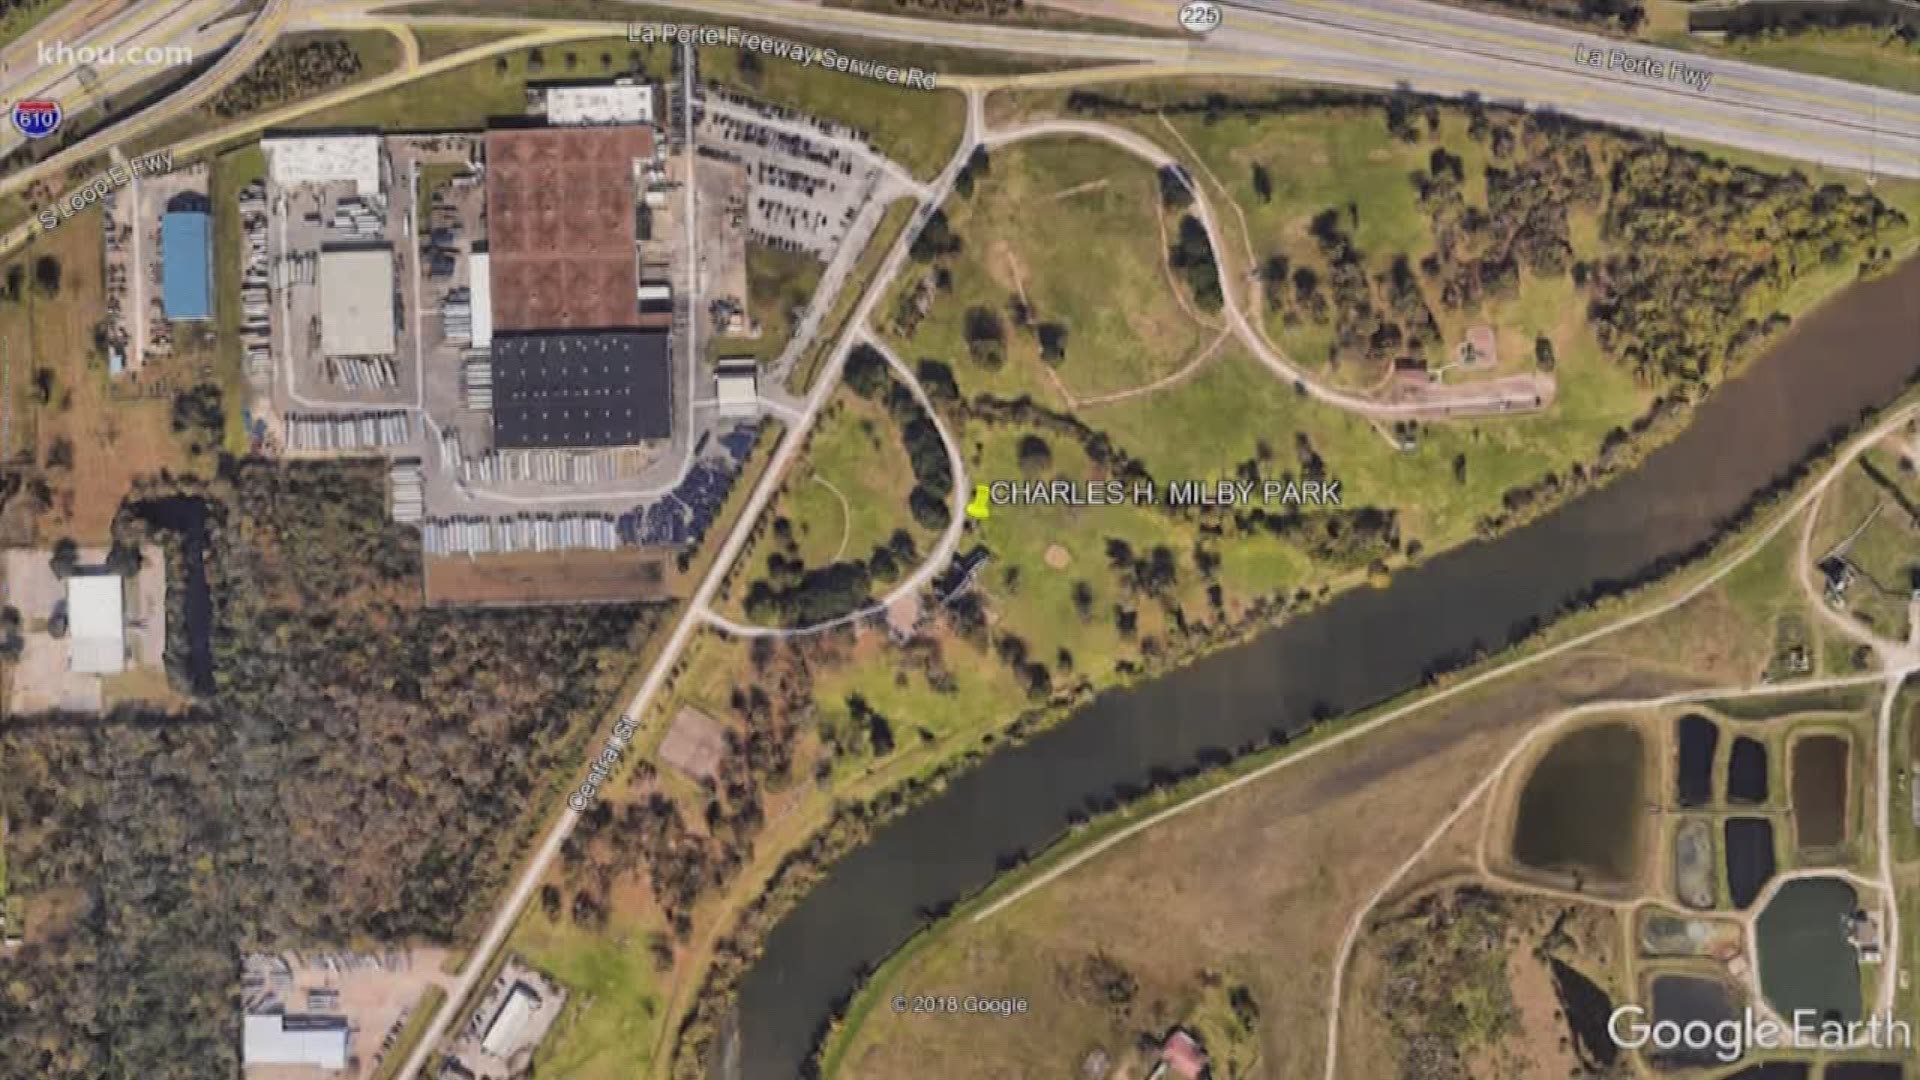 Police are working to recover a body reportedly found in a pond in Milby Park around lunchtime Wednesday.